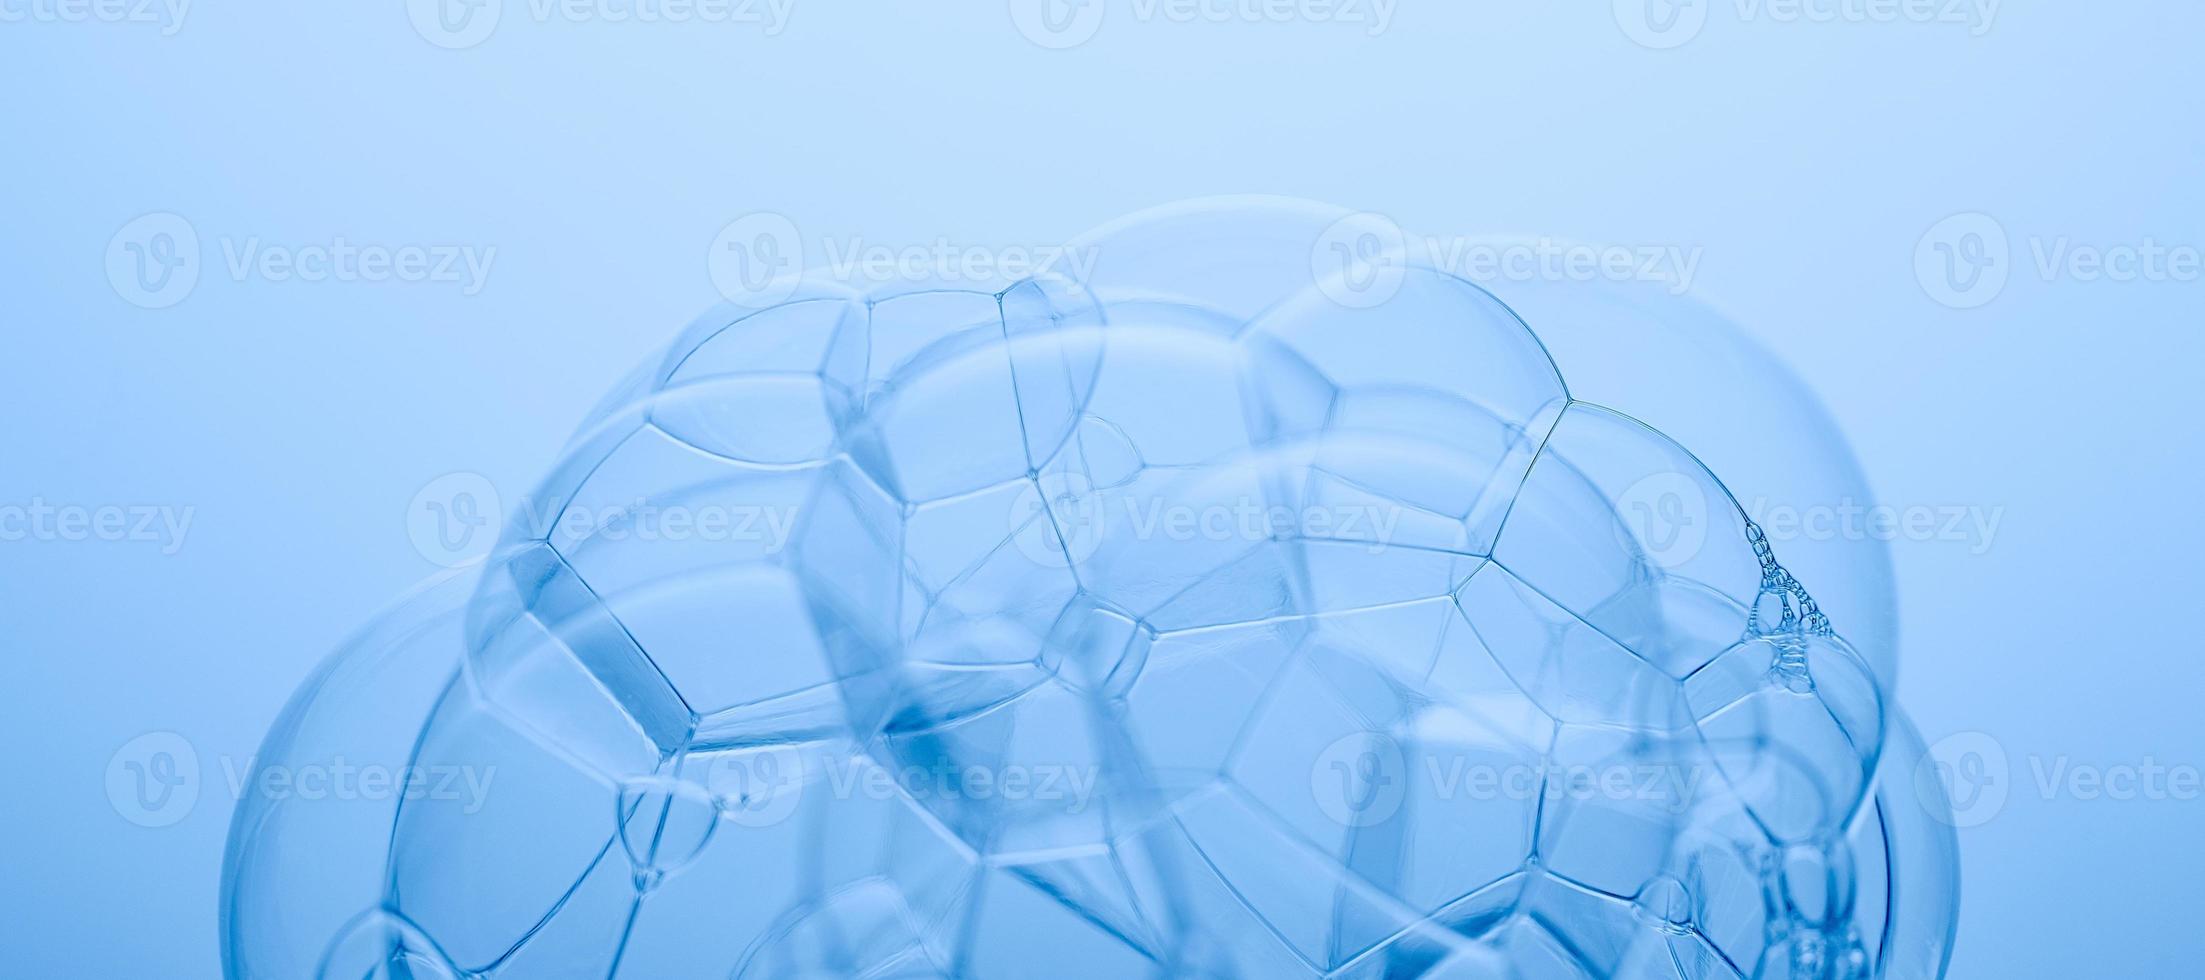 Light blue abstract photo. Soap bubbles on a blue background. photo